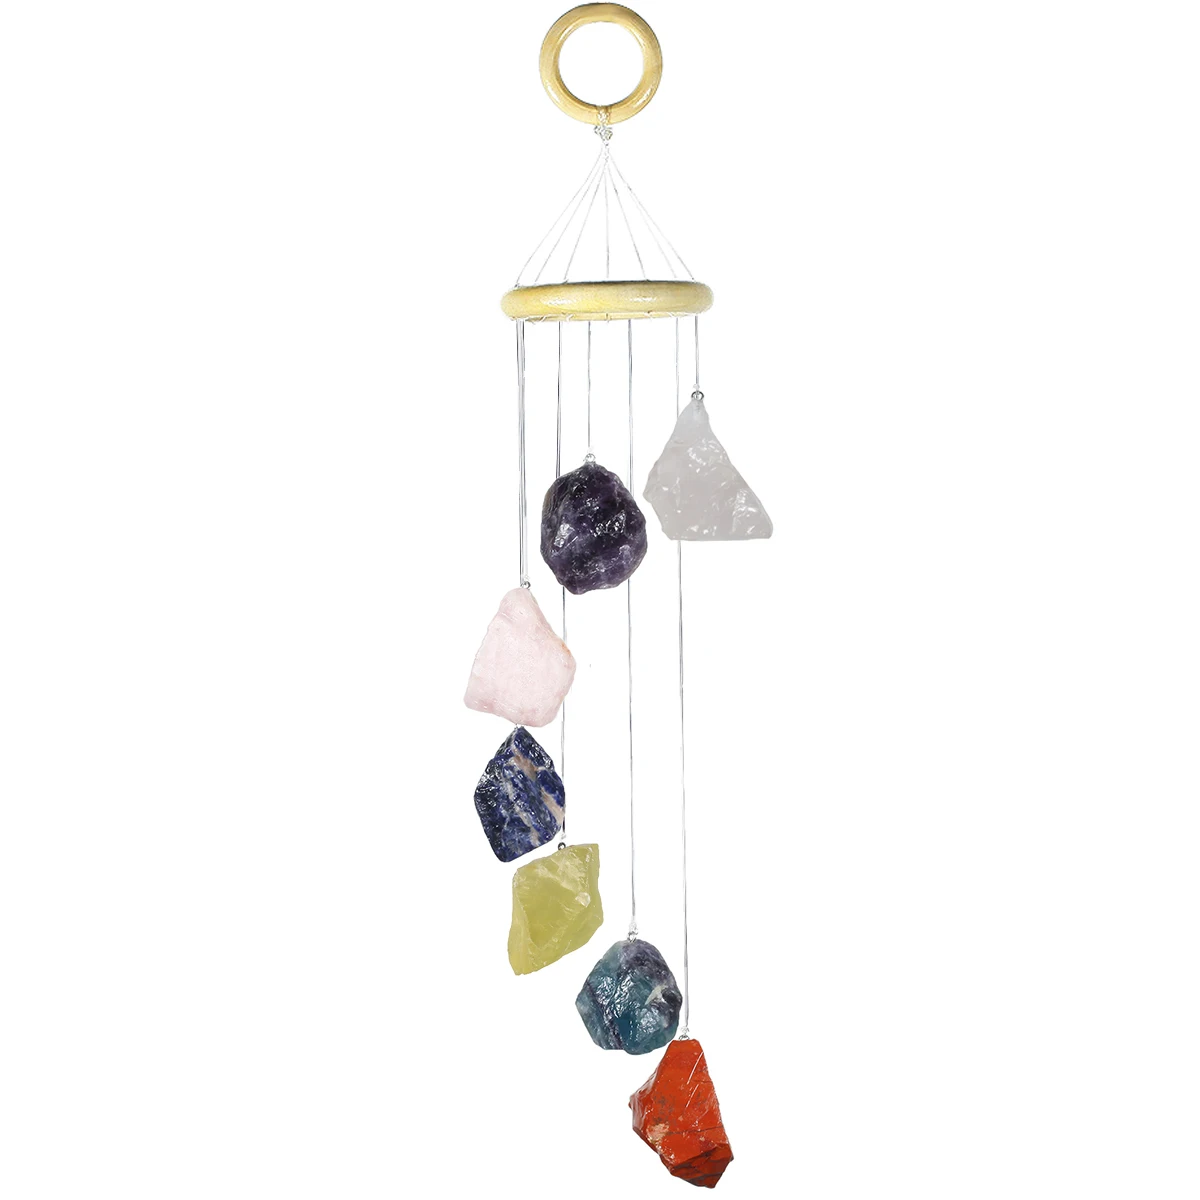 Natural Raw Gemstone Rough Crystal Stone Wind Chimes Reiki Healing Hanging Ornaments For Home Garden Decoration natural crystal stone star moon shape hanging ornament reiki healing gemstone wall decor for window home decoration